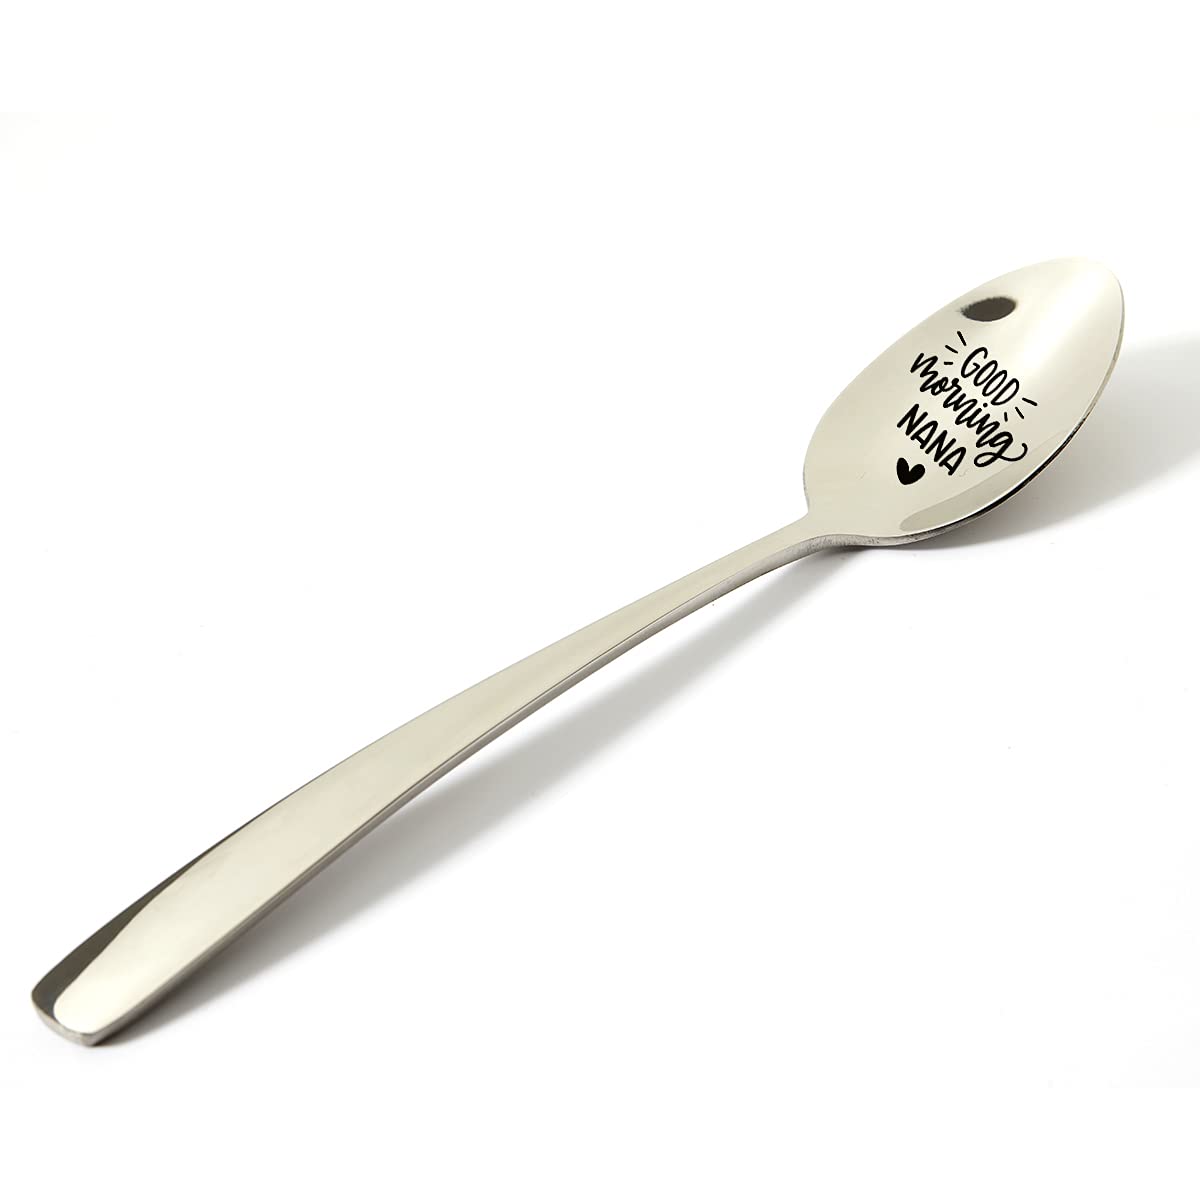 Grandma Gifts from Granddaughter Grandson Wife, Funny Good Morning Nana Spoon Engraved Stainless Steel, Tea Lover Coffee Lovers Gifts, Nana Birthday Valentine Mother's Day Christmas Gift